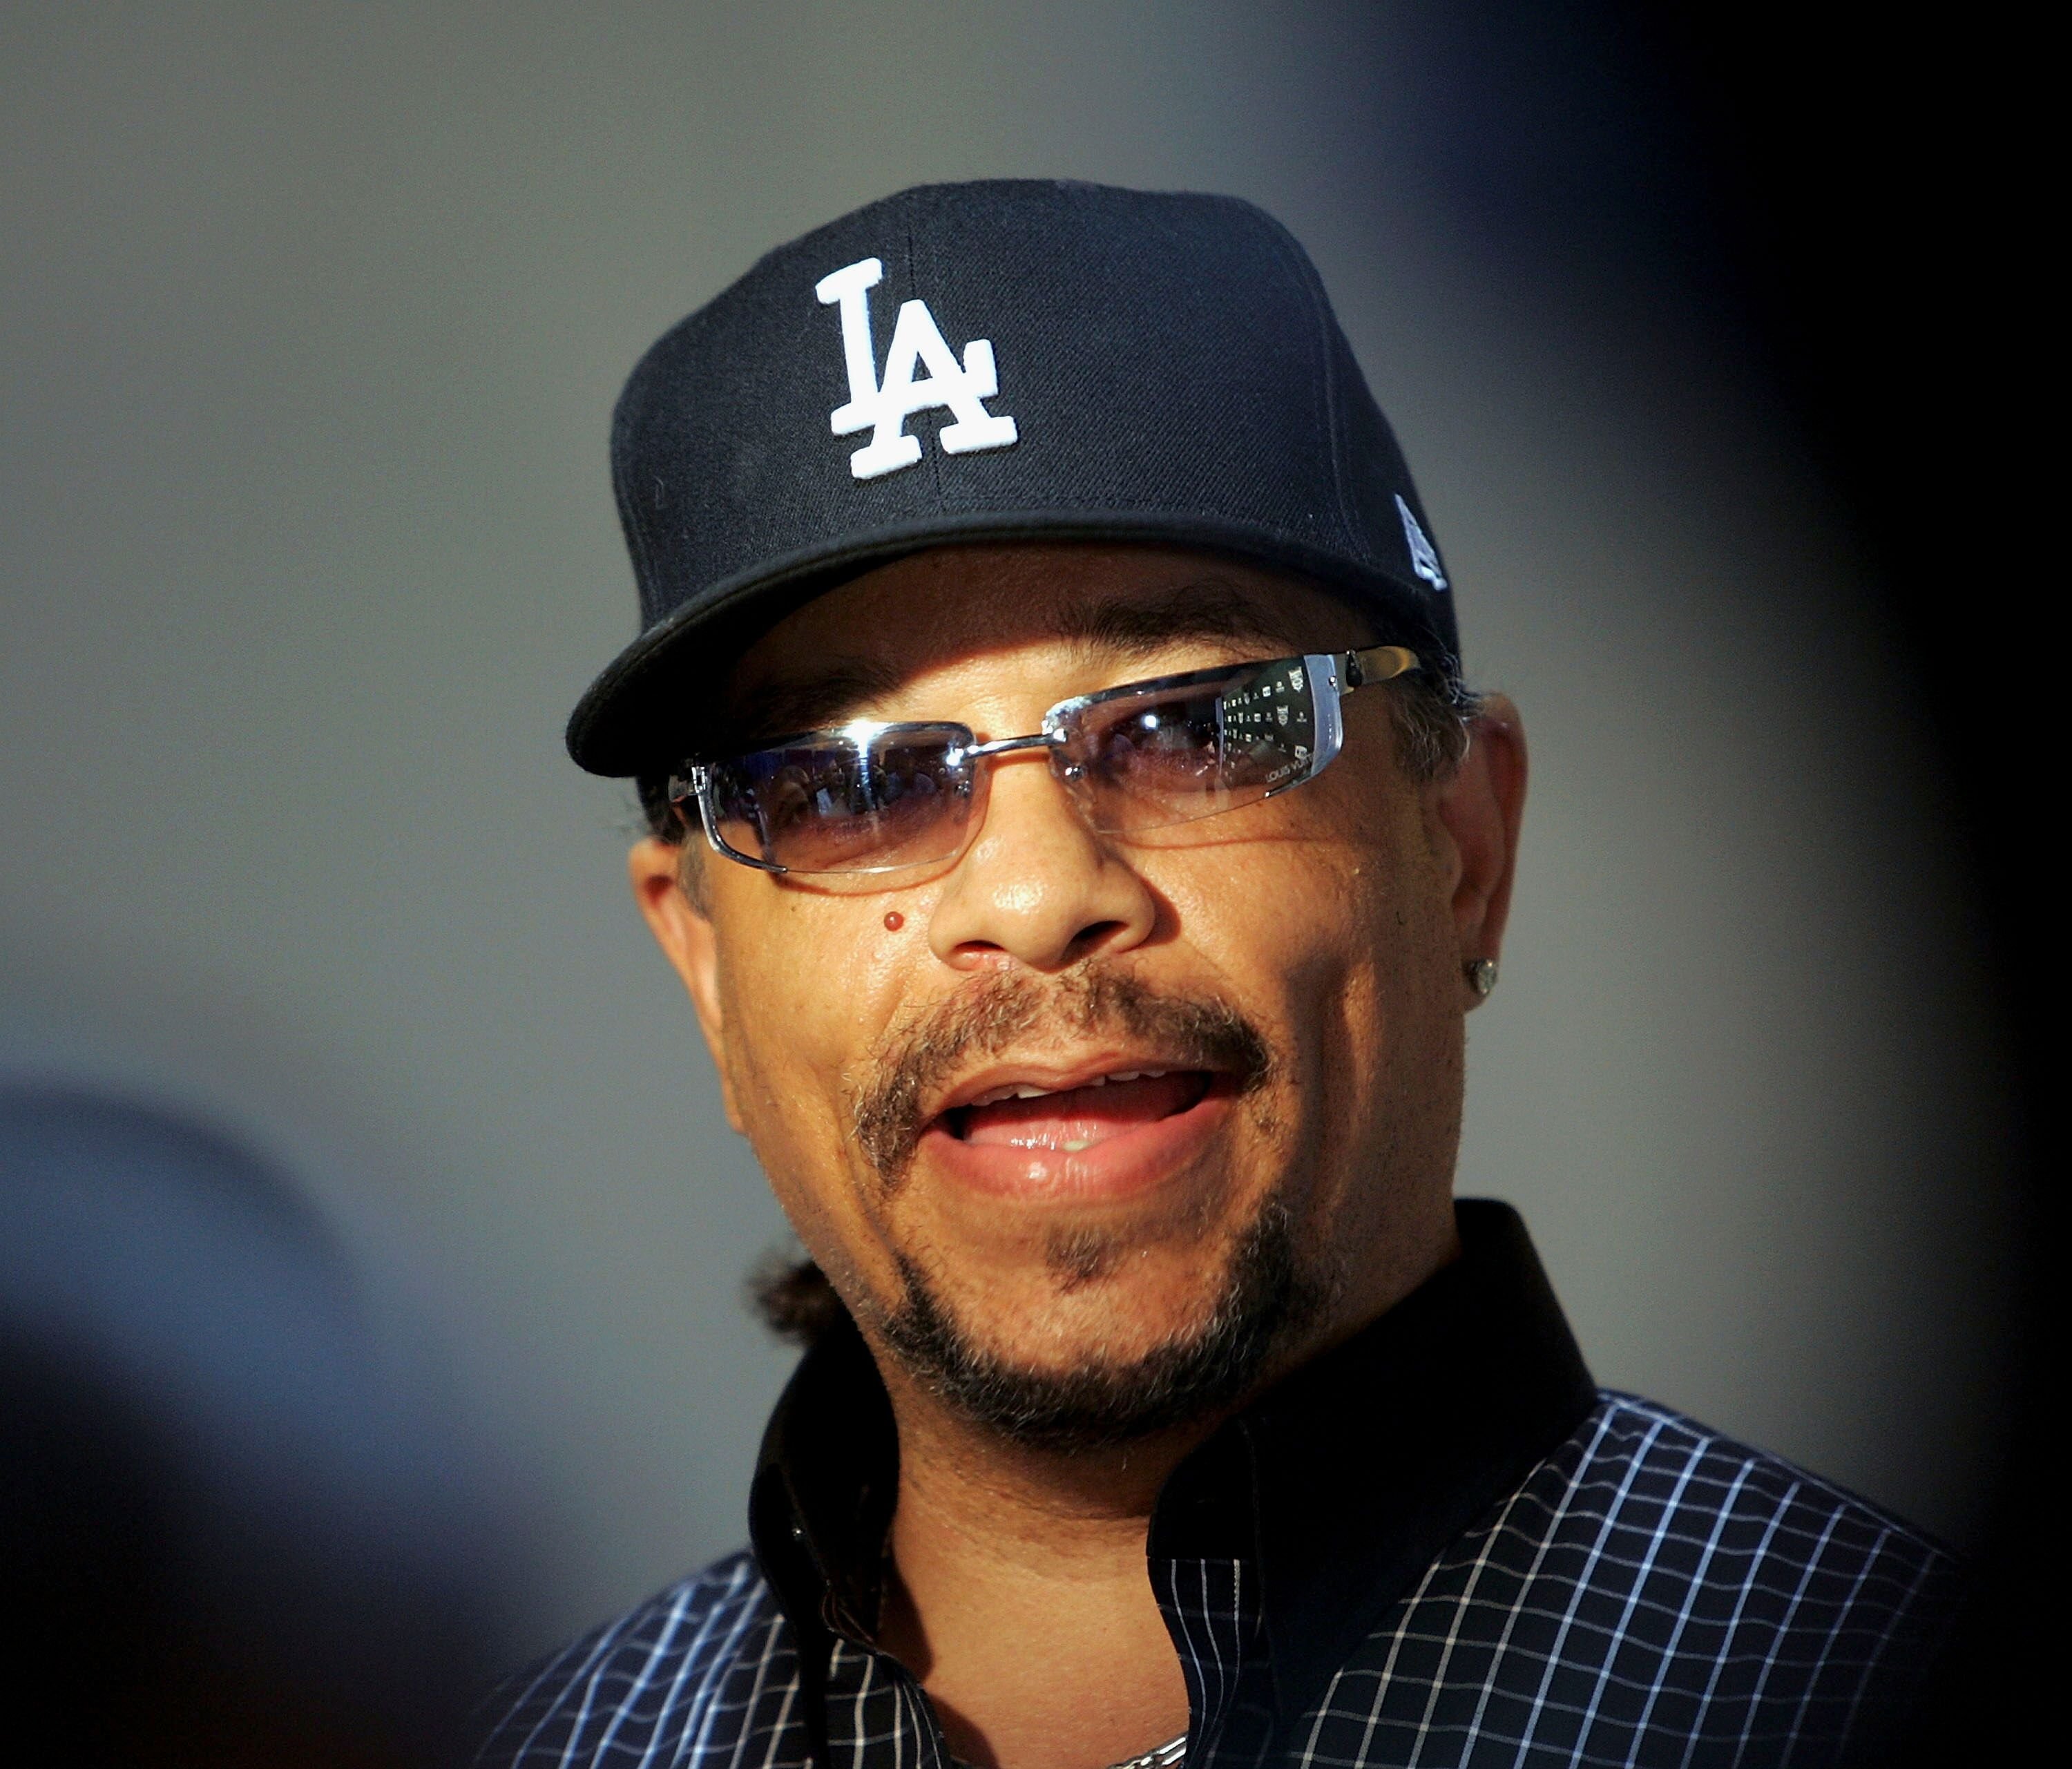  Ice-T attends VH1's 2005 Hip Hop Honors Pre-party at Splashlight Studios. | Source: Getty Images